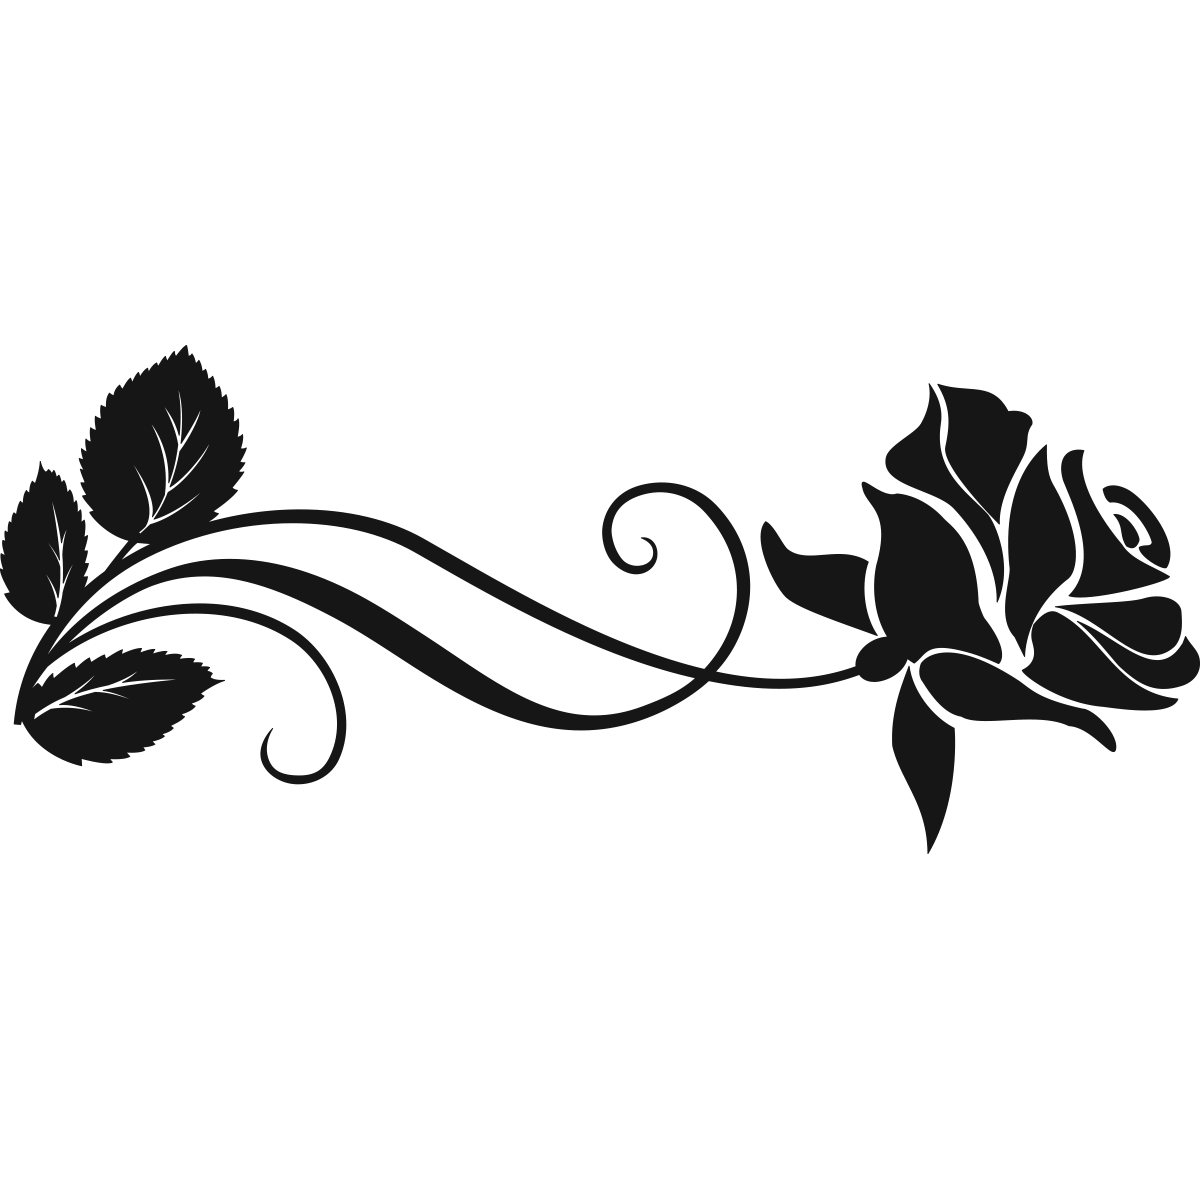 Clip art Rose Vector graphics Silhouette Flower - rose png download ...